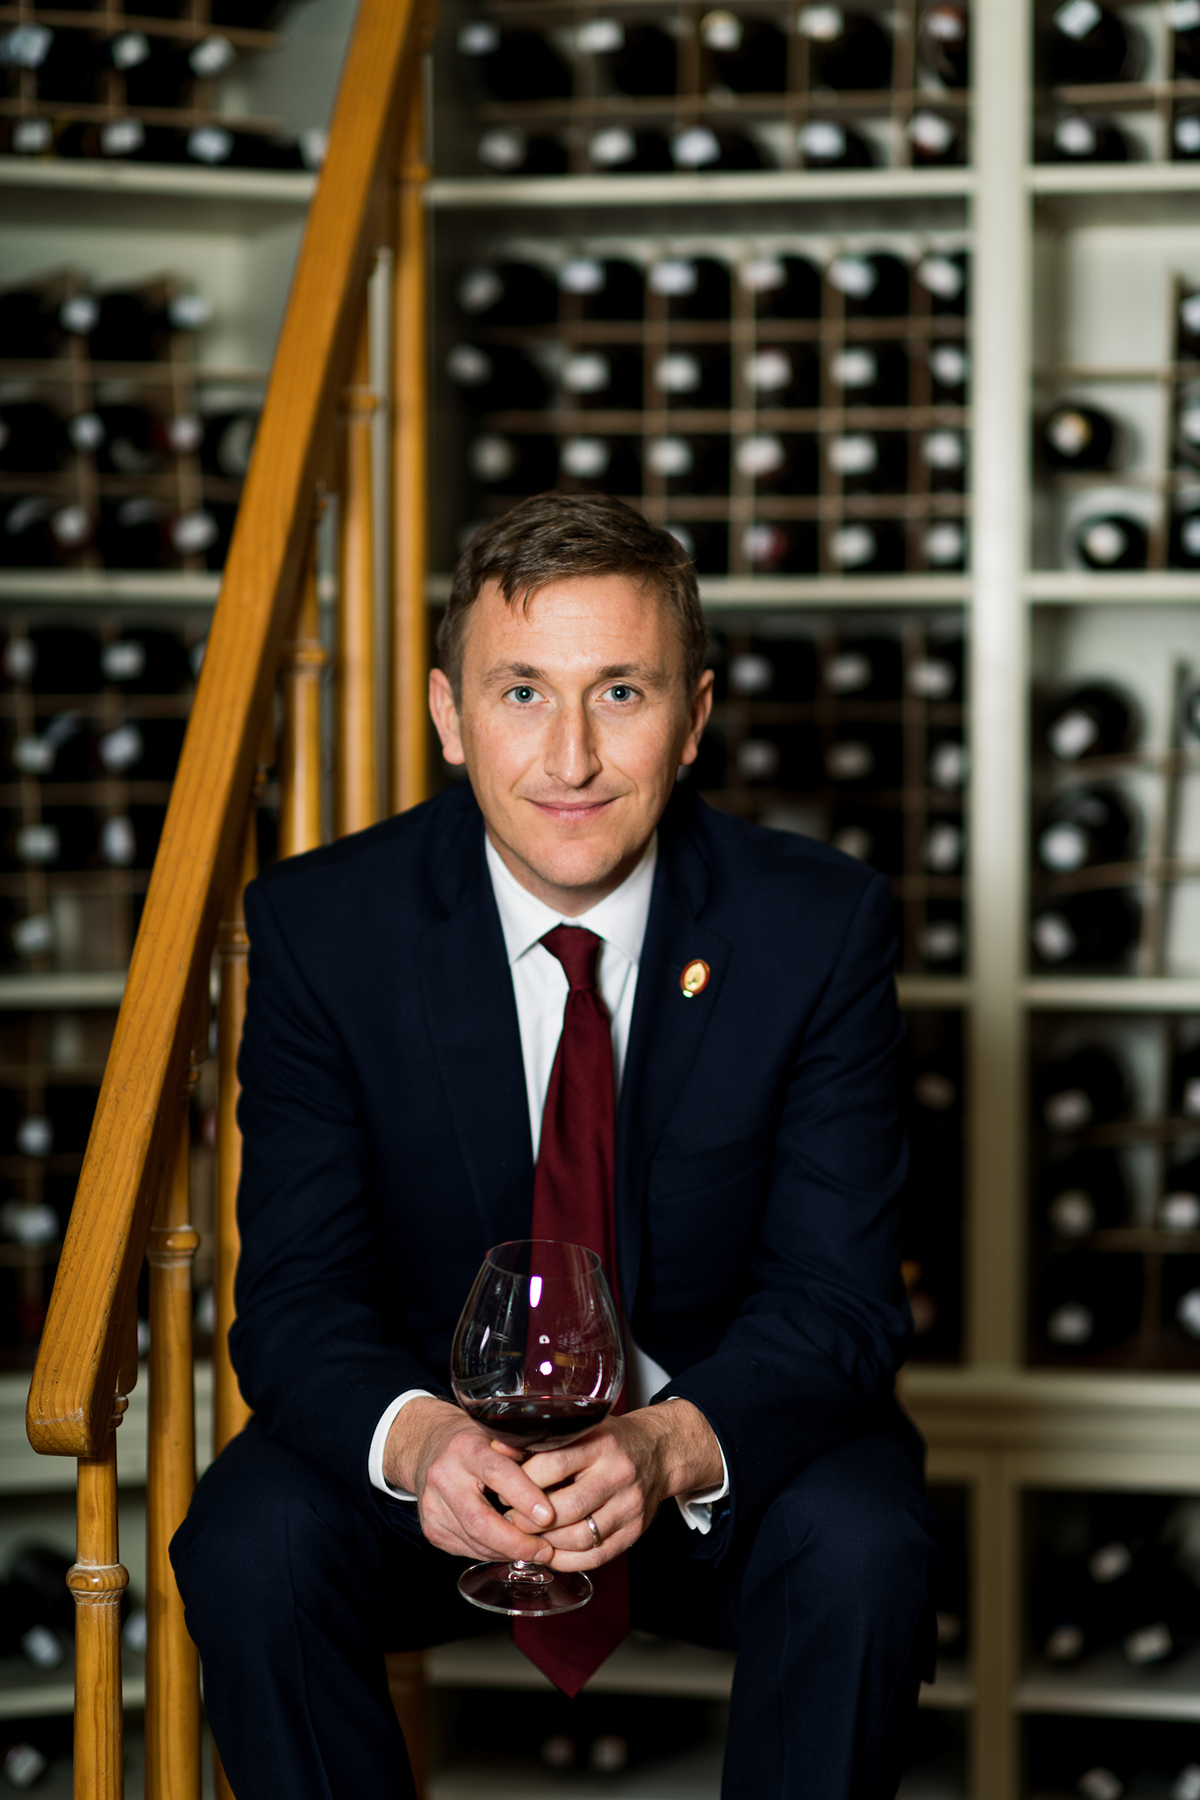 A man in a suit and red wine sitting with a glass of red wine in front of bottles of wine